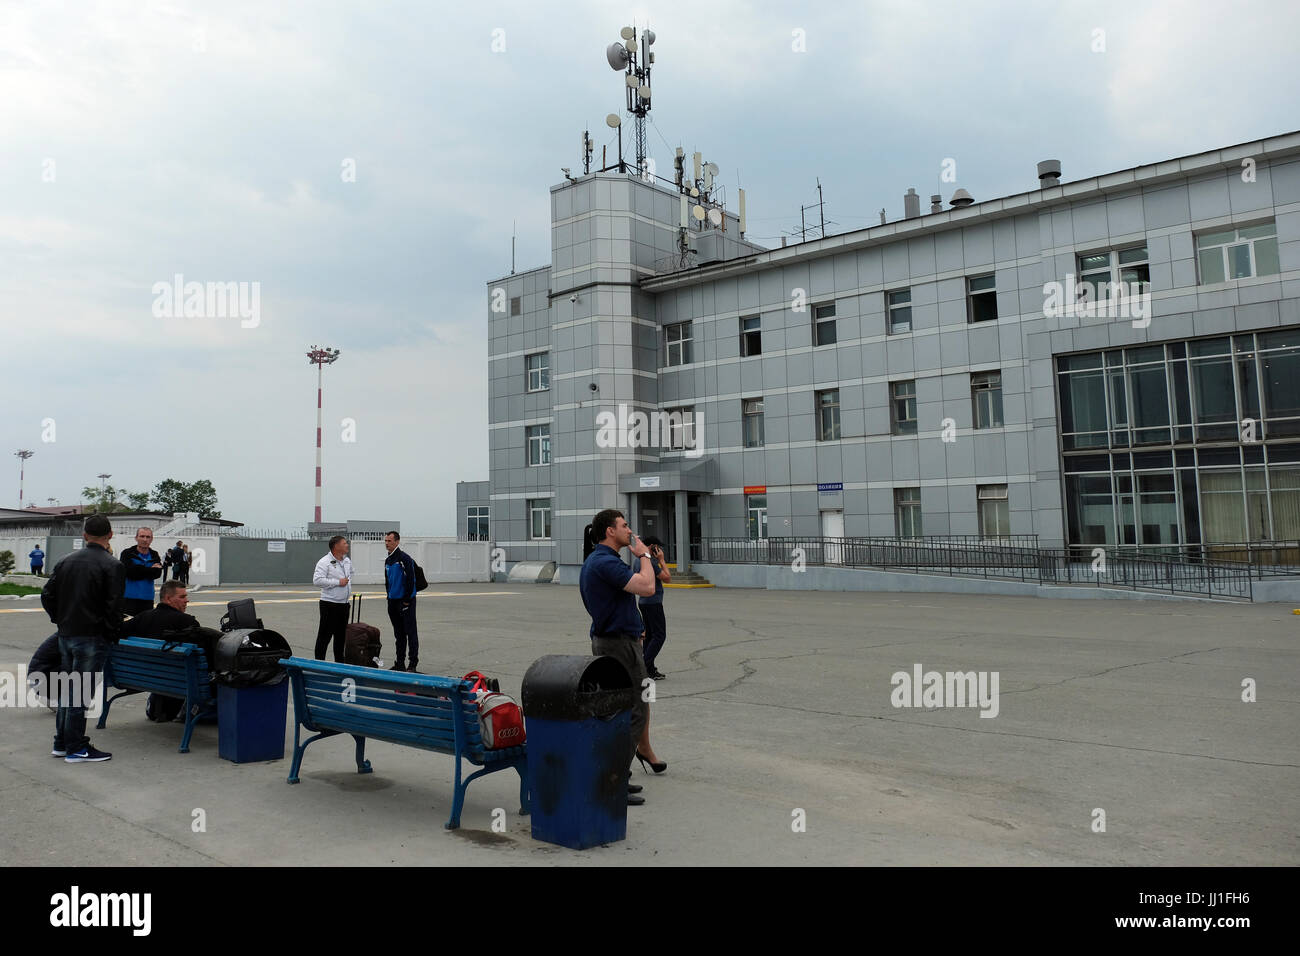 People wait outside Yuzhno-Sakhalinsk Airport also called Khomutovo in the city of Yuzhno-Sakhalinsk, in the island of Sakhalin, in the Pacific Ocean. Russia Stock Photo